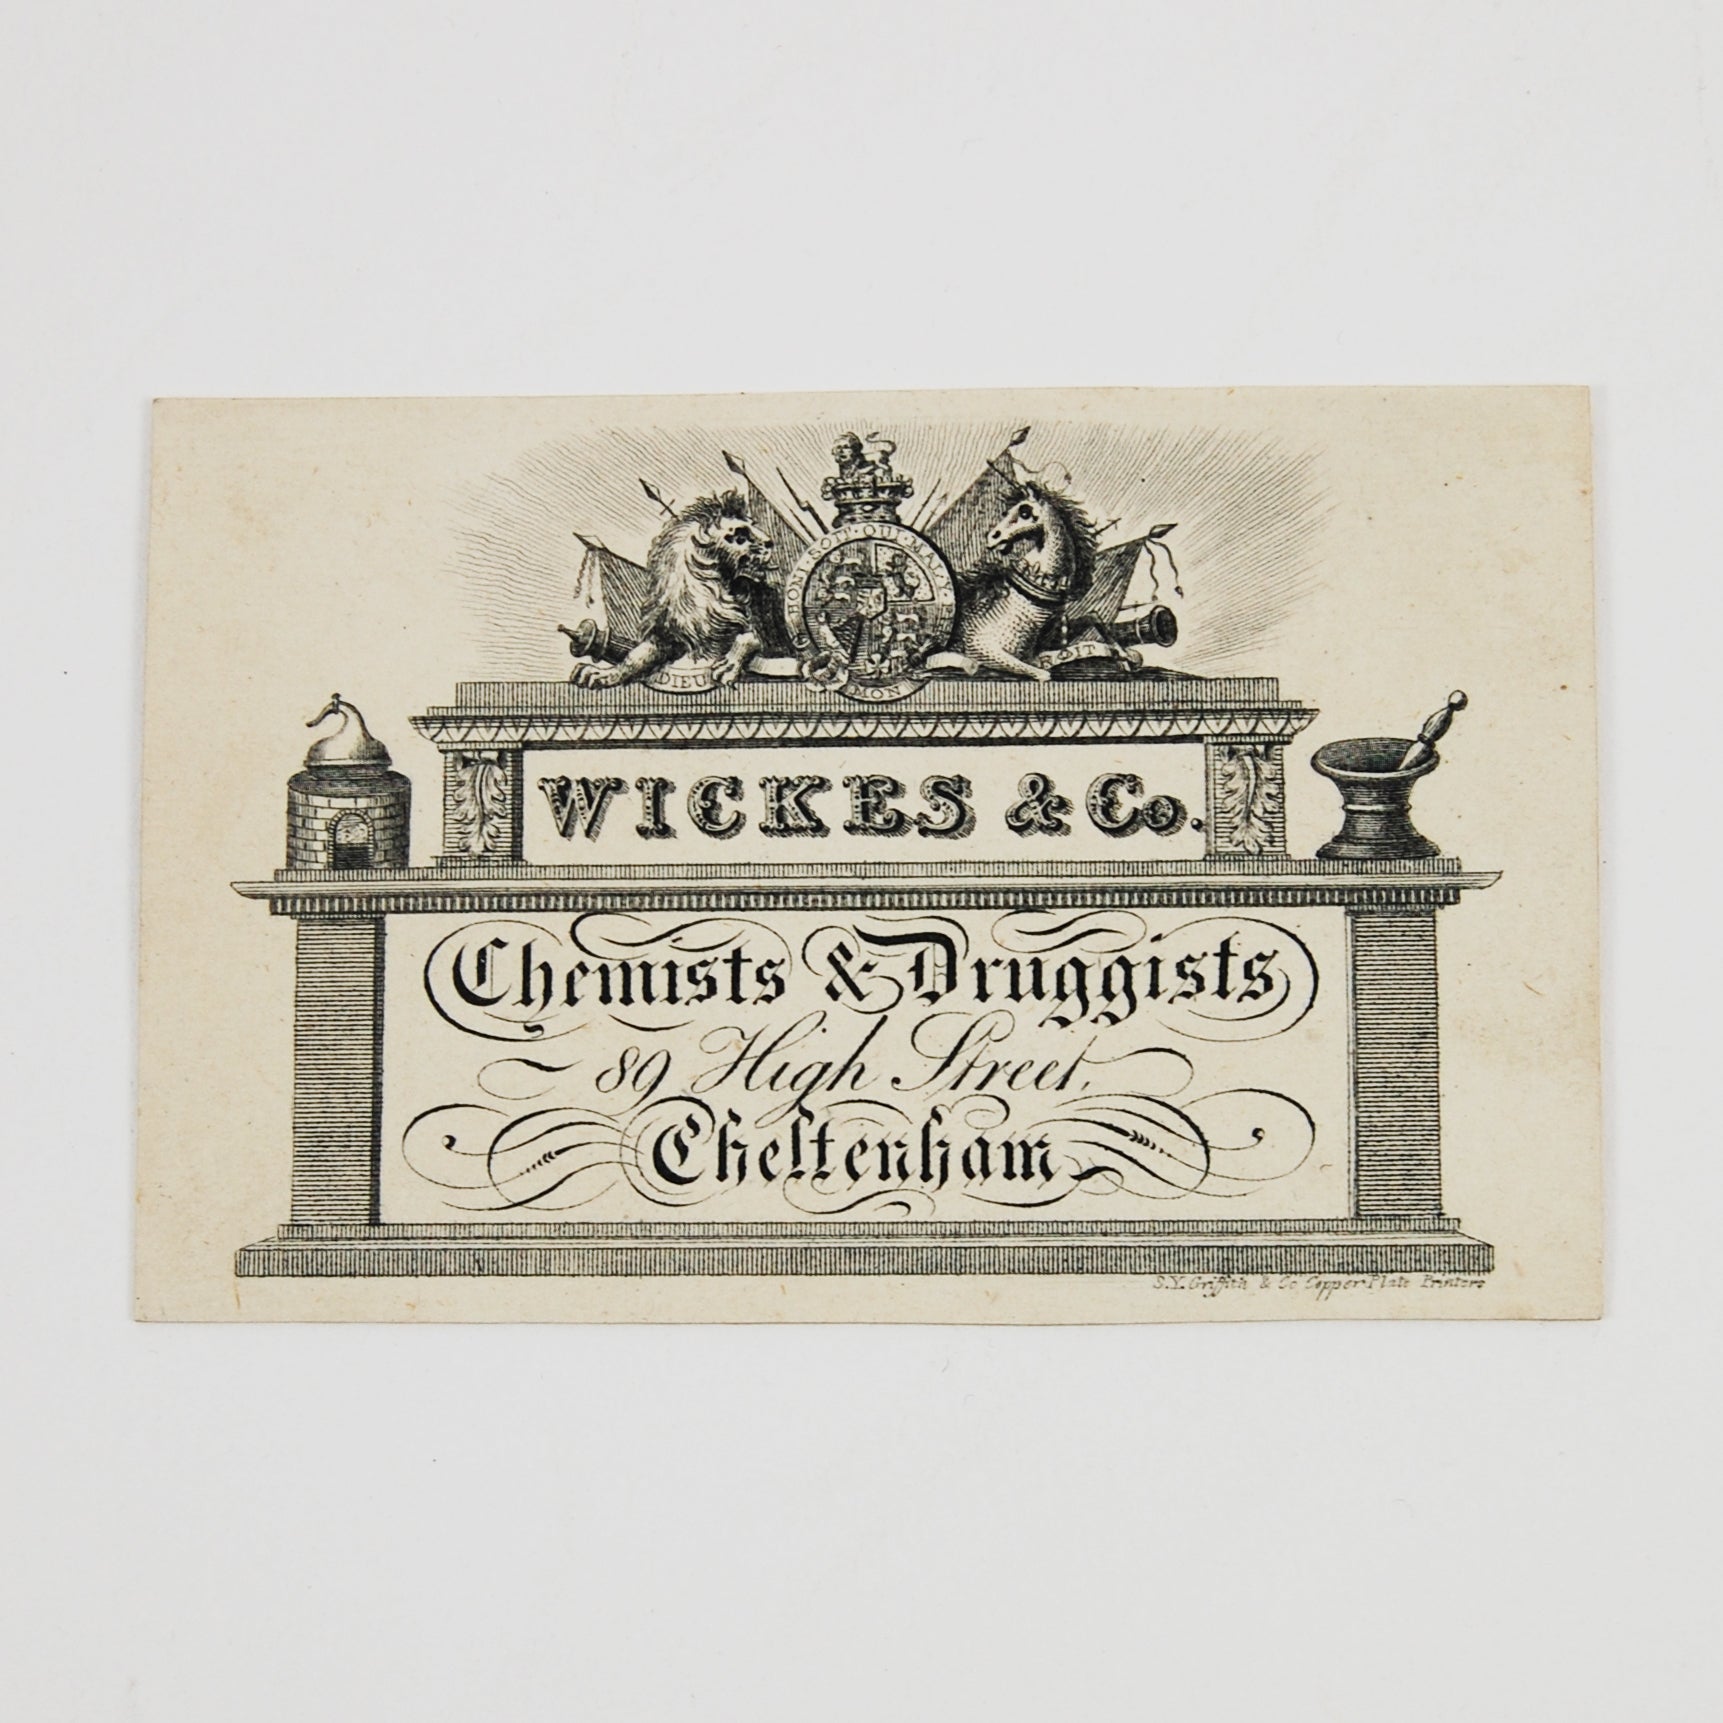 Wickes & Co. | Trade card of Wickes & Co., Chemists and Druggists